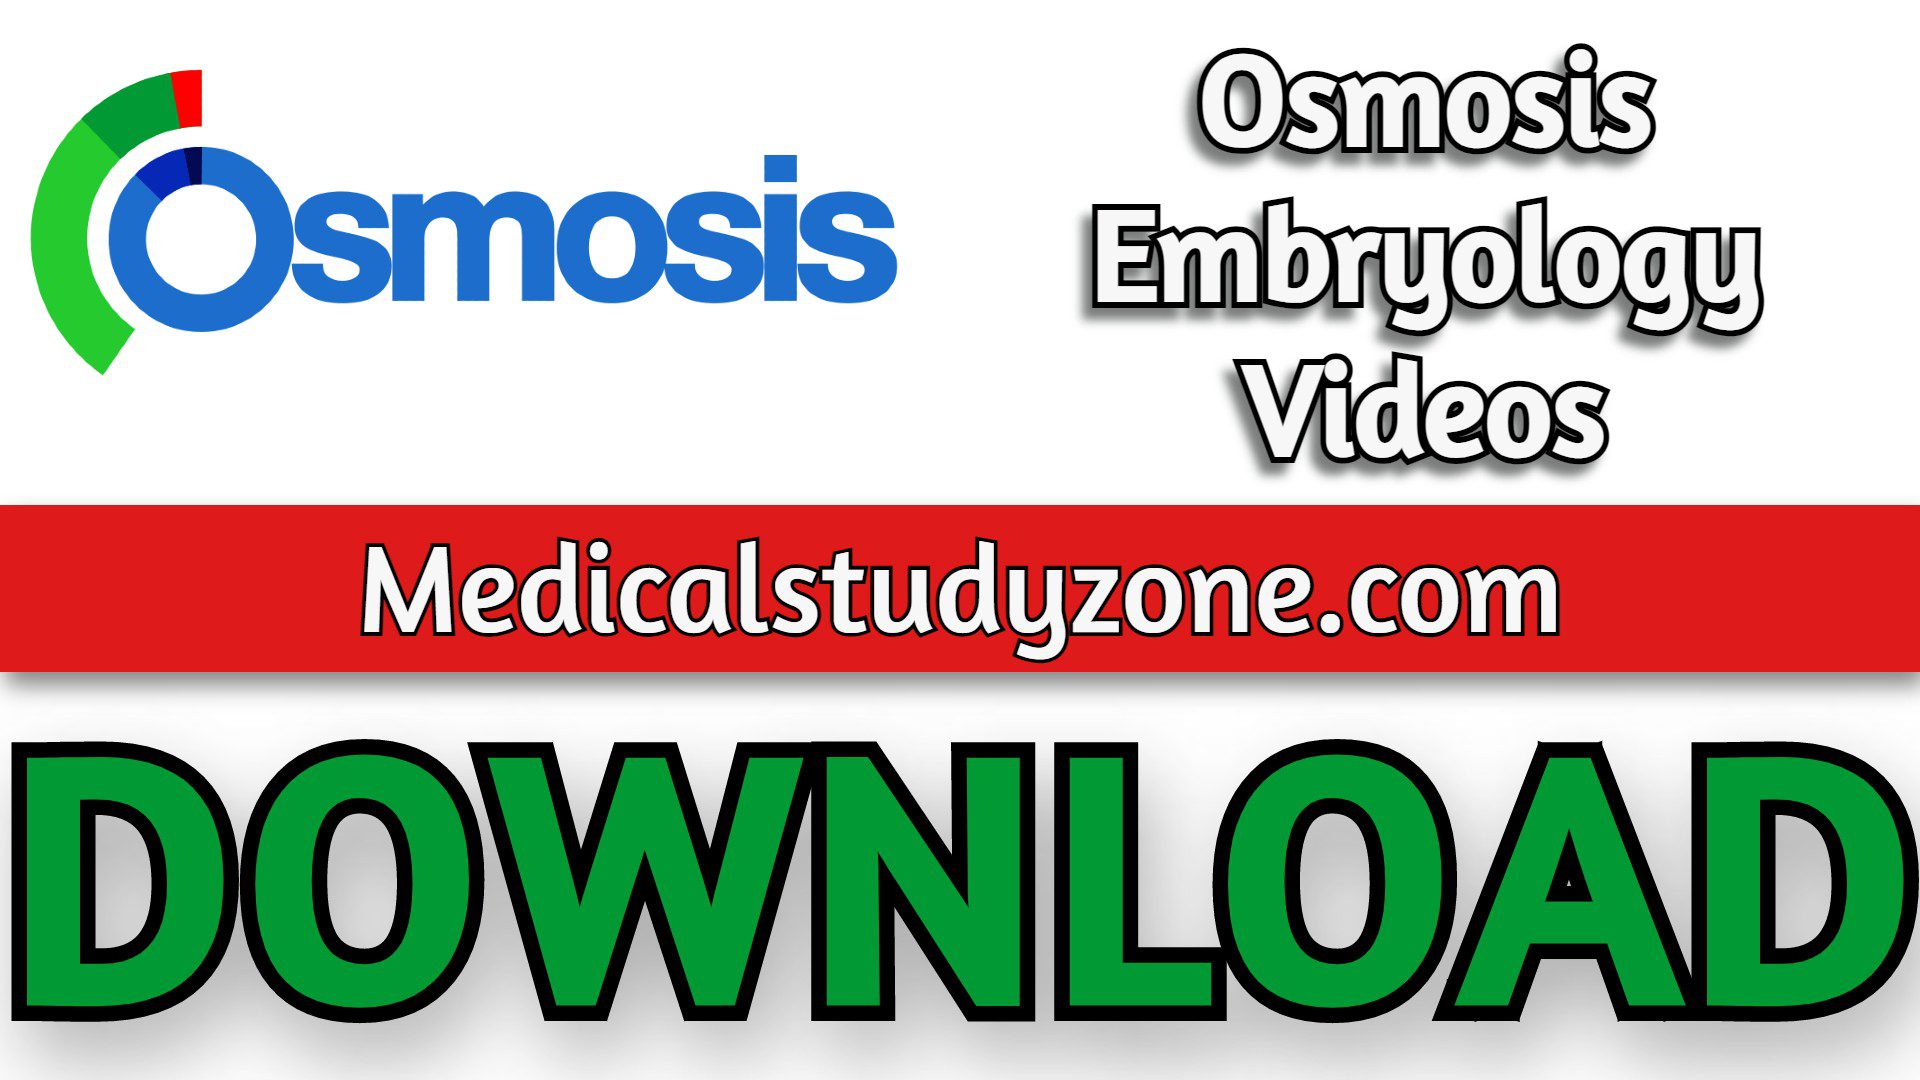 Osmosis Embryology Videos 2022 Free Download